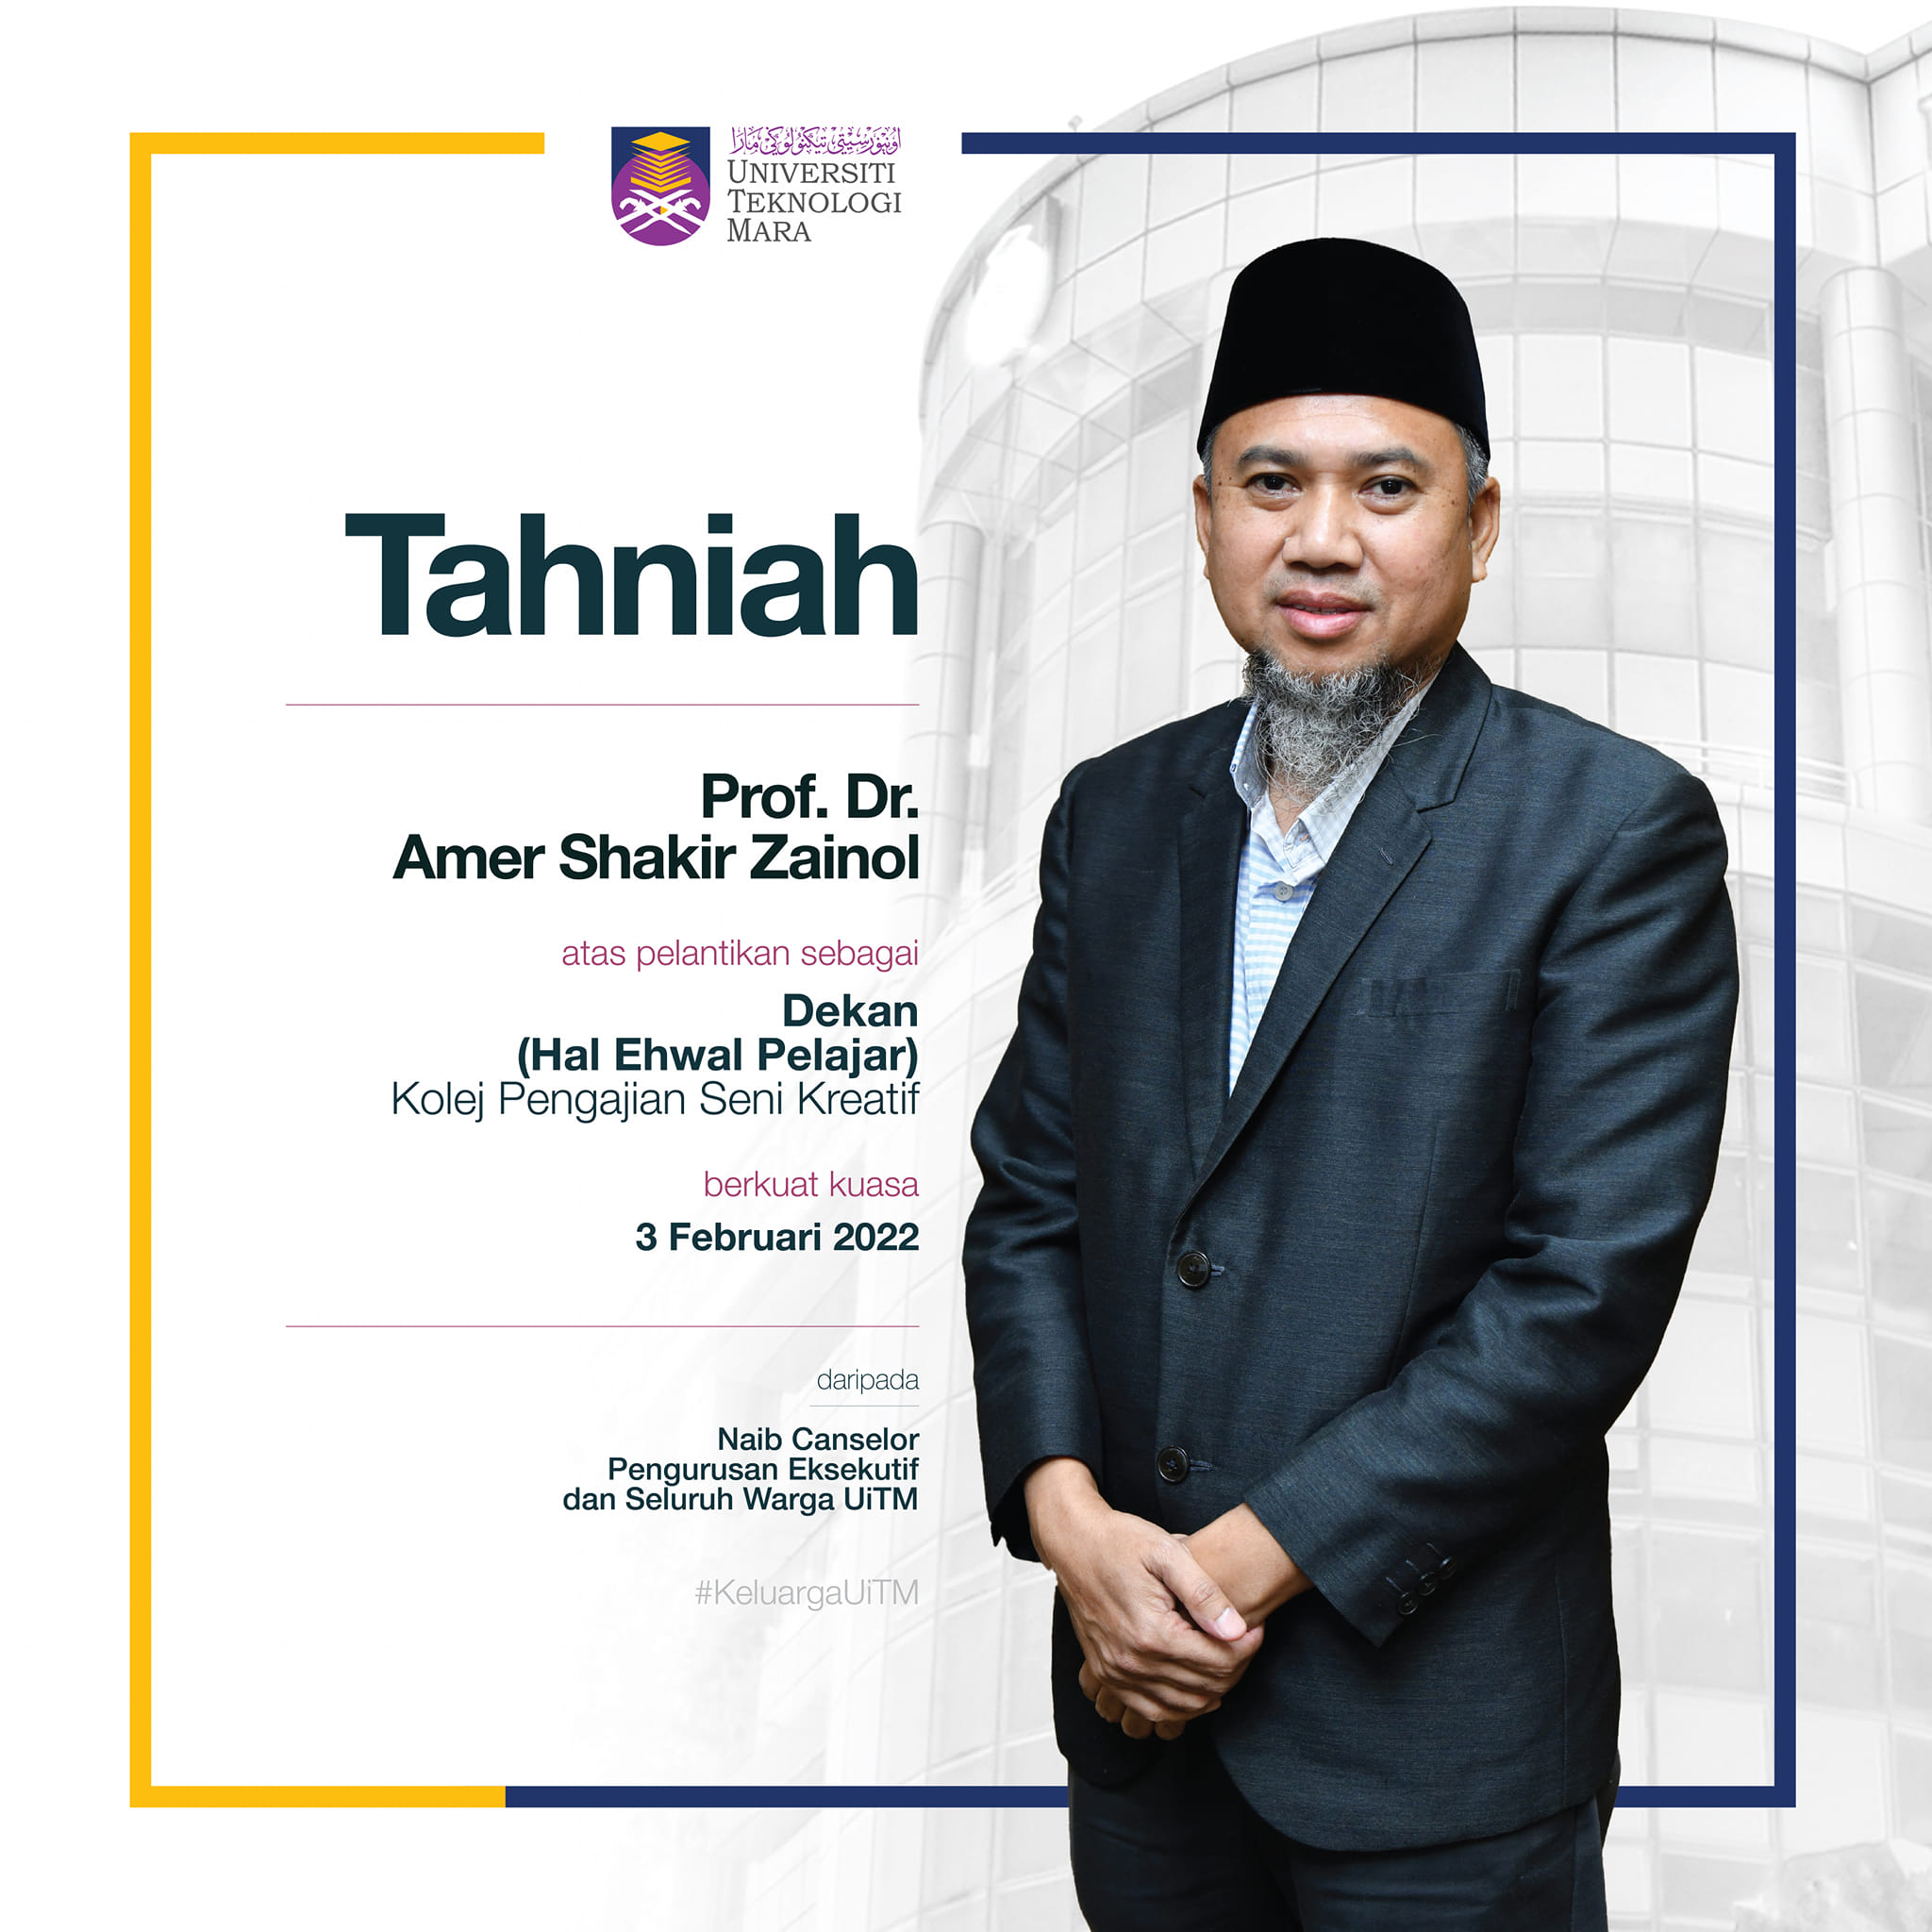 Protecting arts, culture and heritage one step at a time with uitm's randai program | weirdkaya